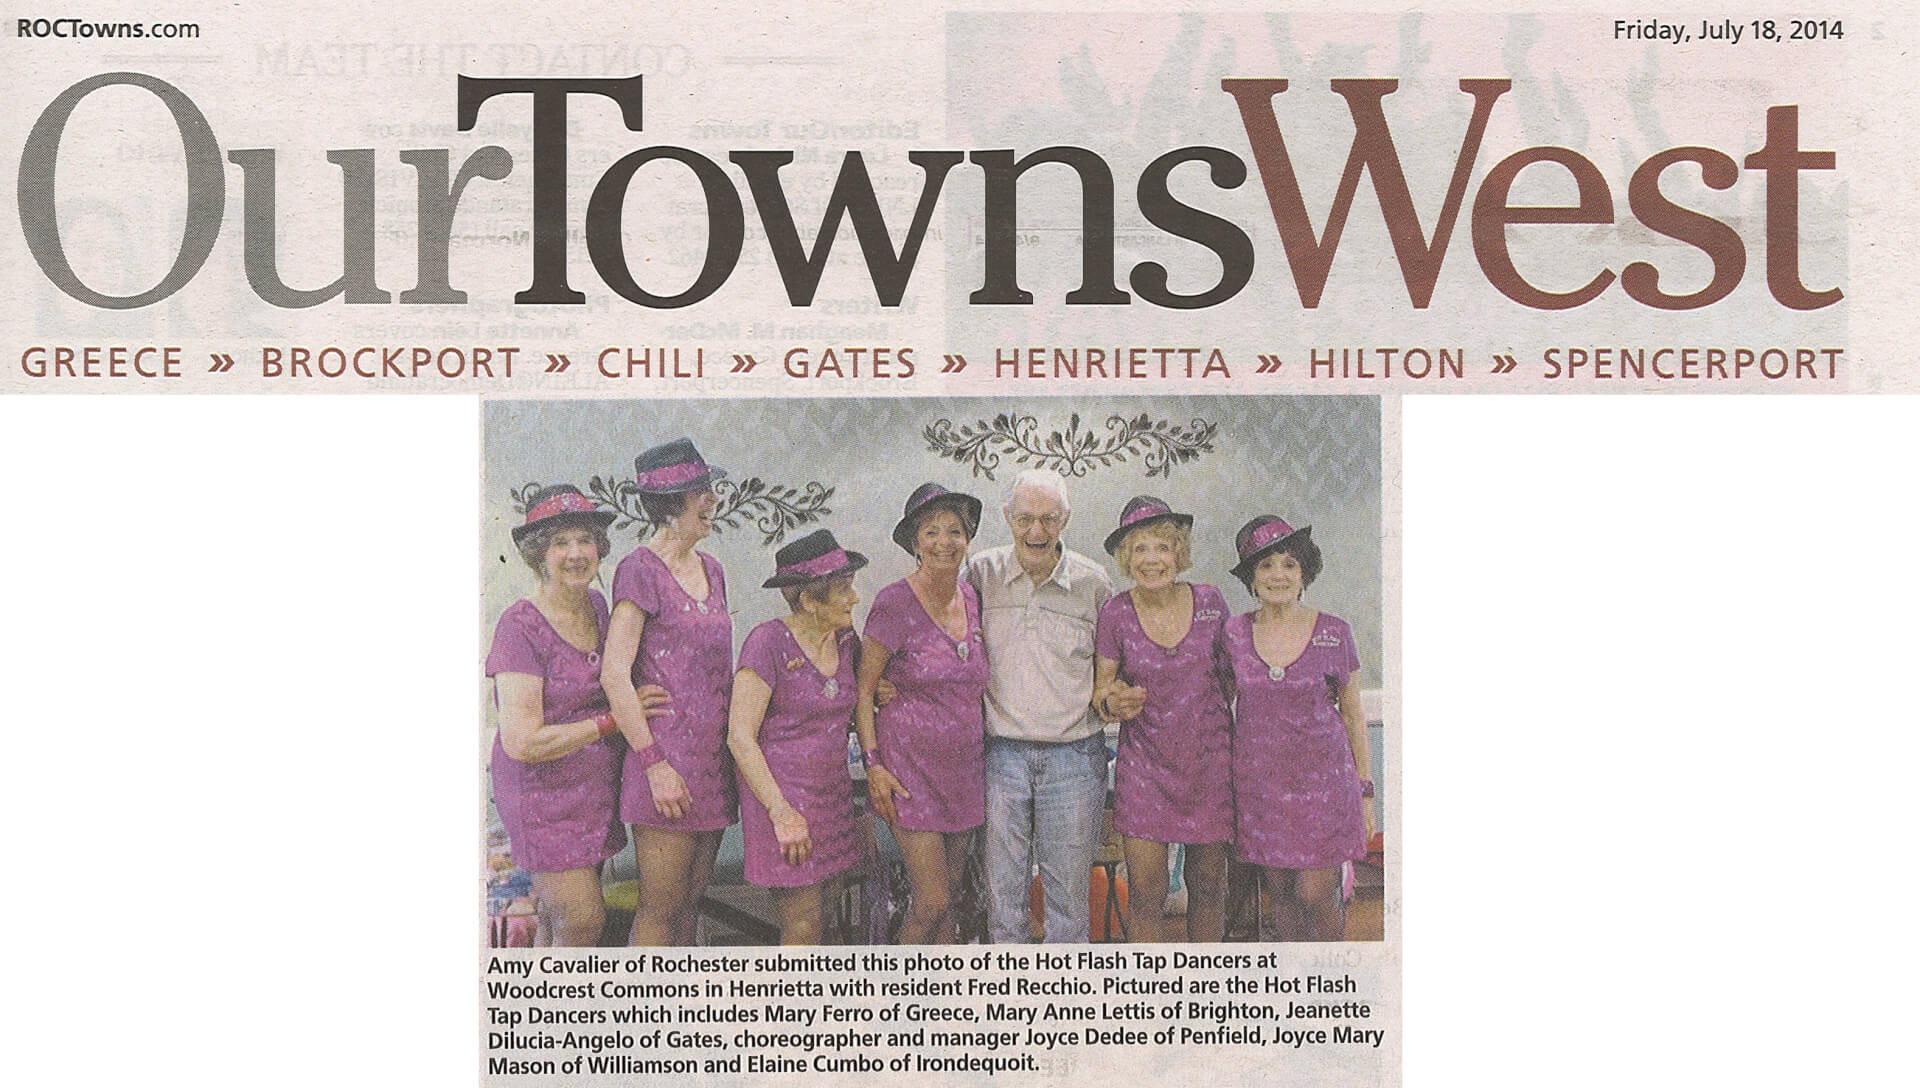 Woodcrest Commons Hot Flash Tap Dancers Story in D&C Our Towns West DC July 18, 2014